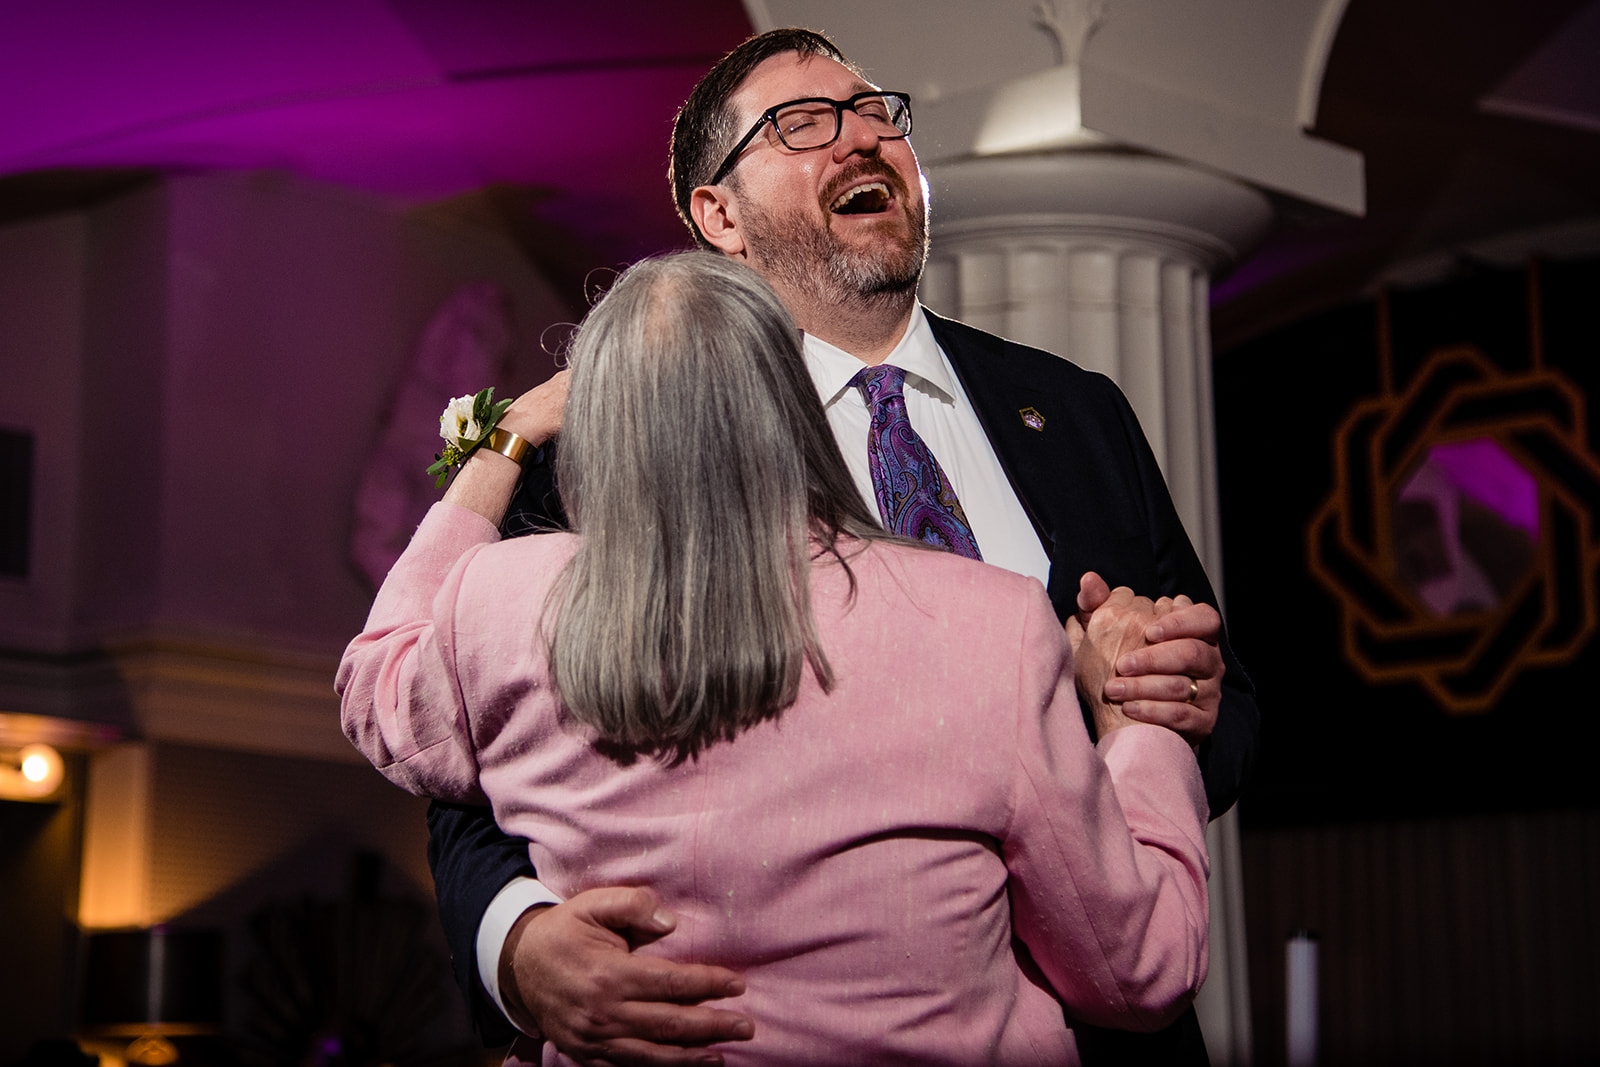 Mother-son dance at the wedding reception at Hotel Monaco in Washington DC by Potok's World Photography